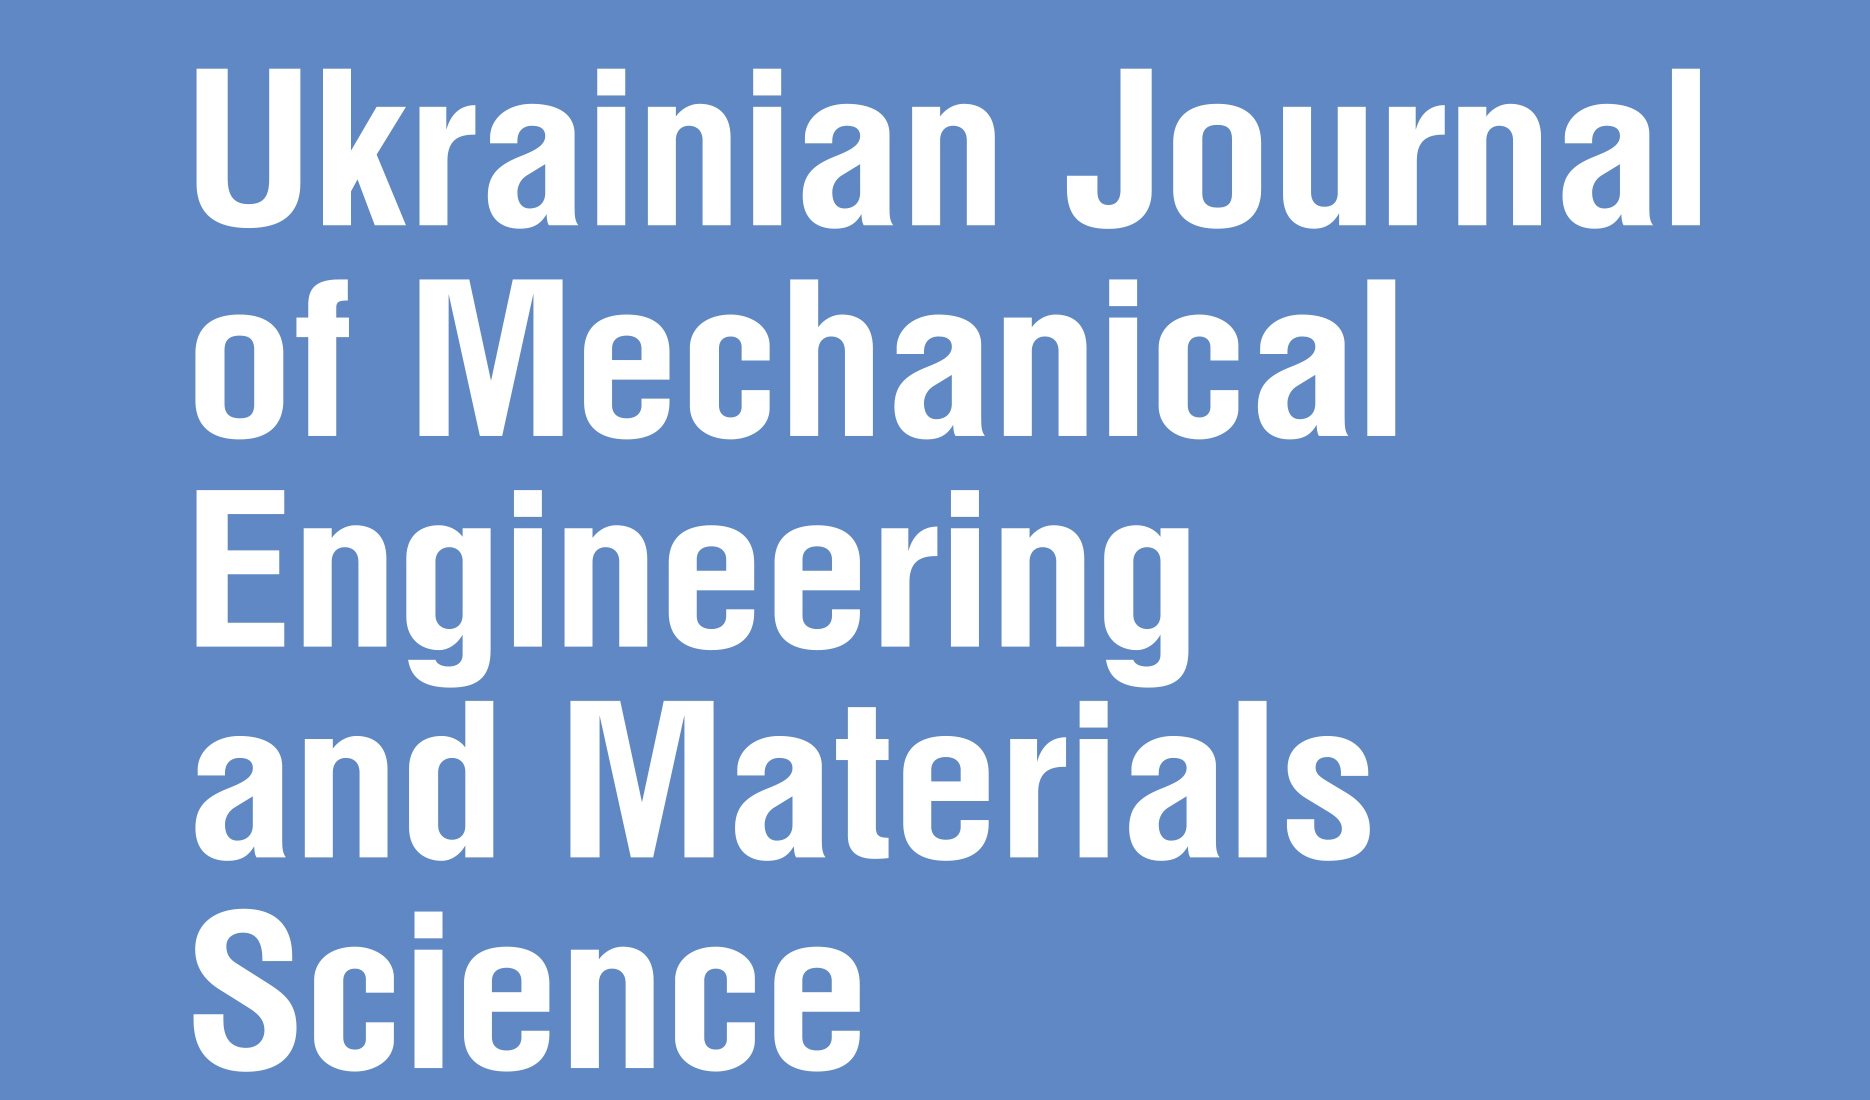 Ukrainian Journal of Mechanical Engineering and Materials Science